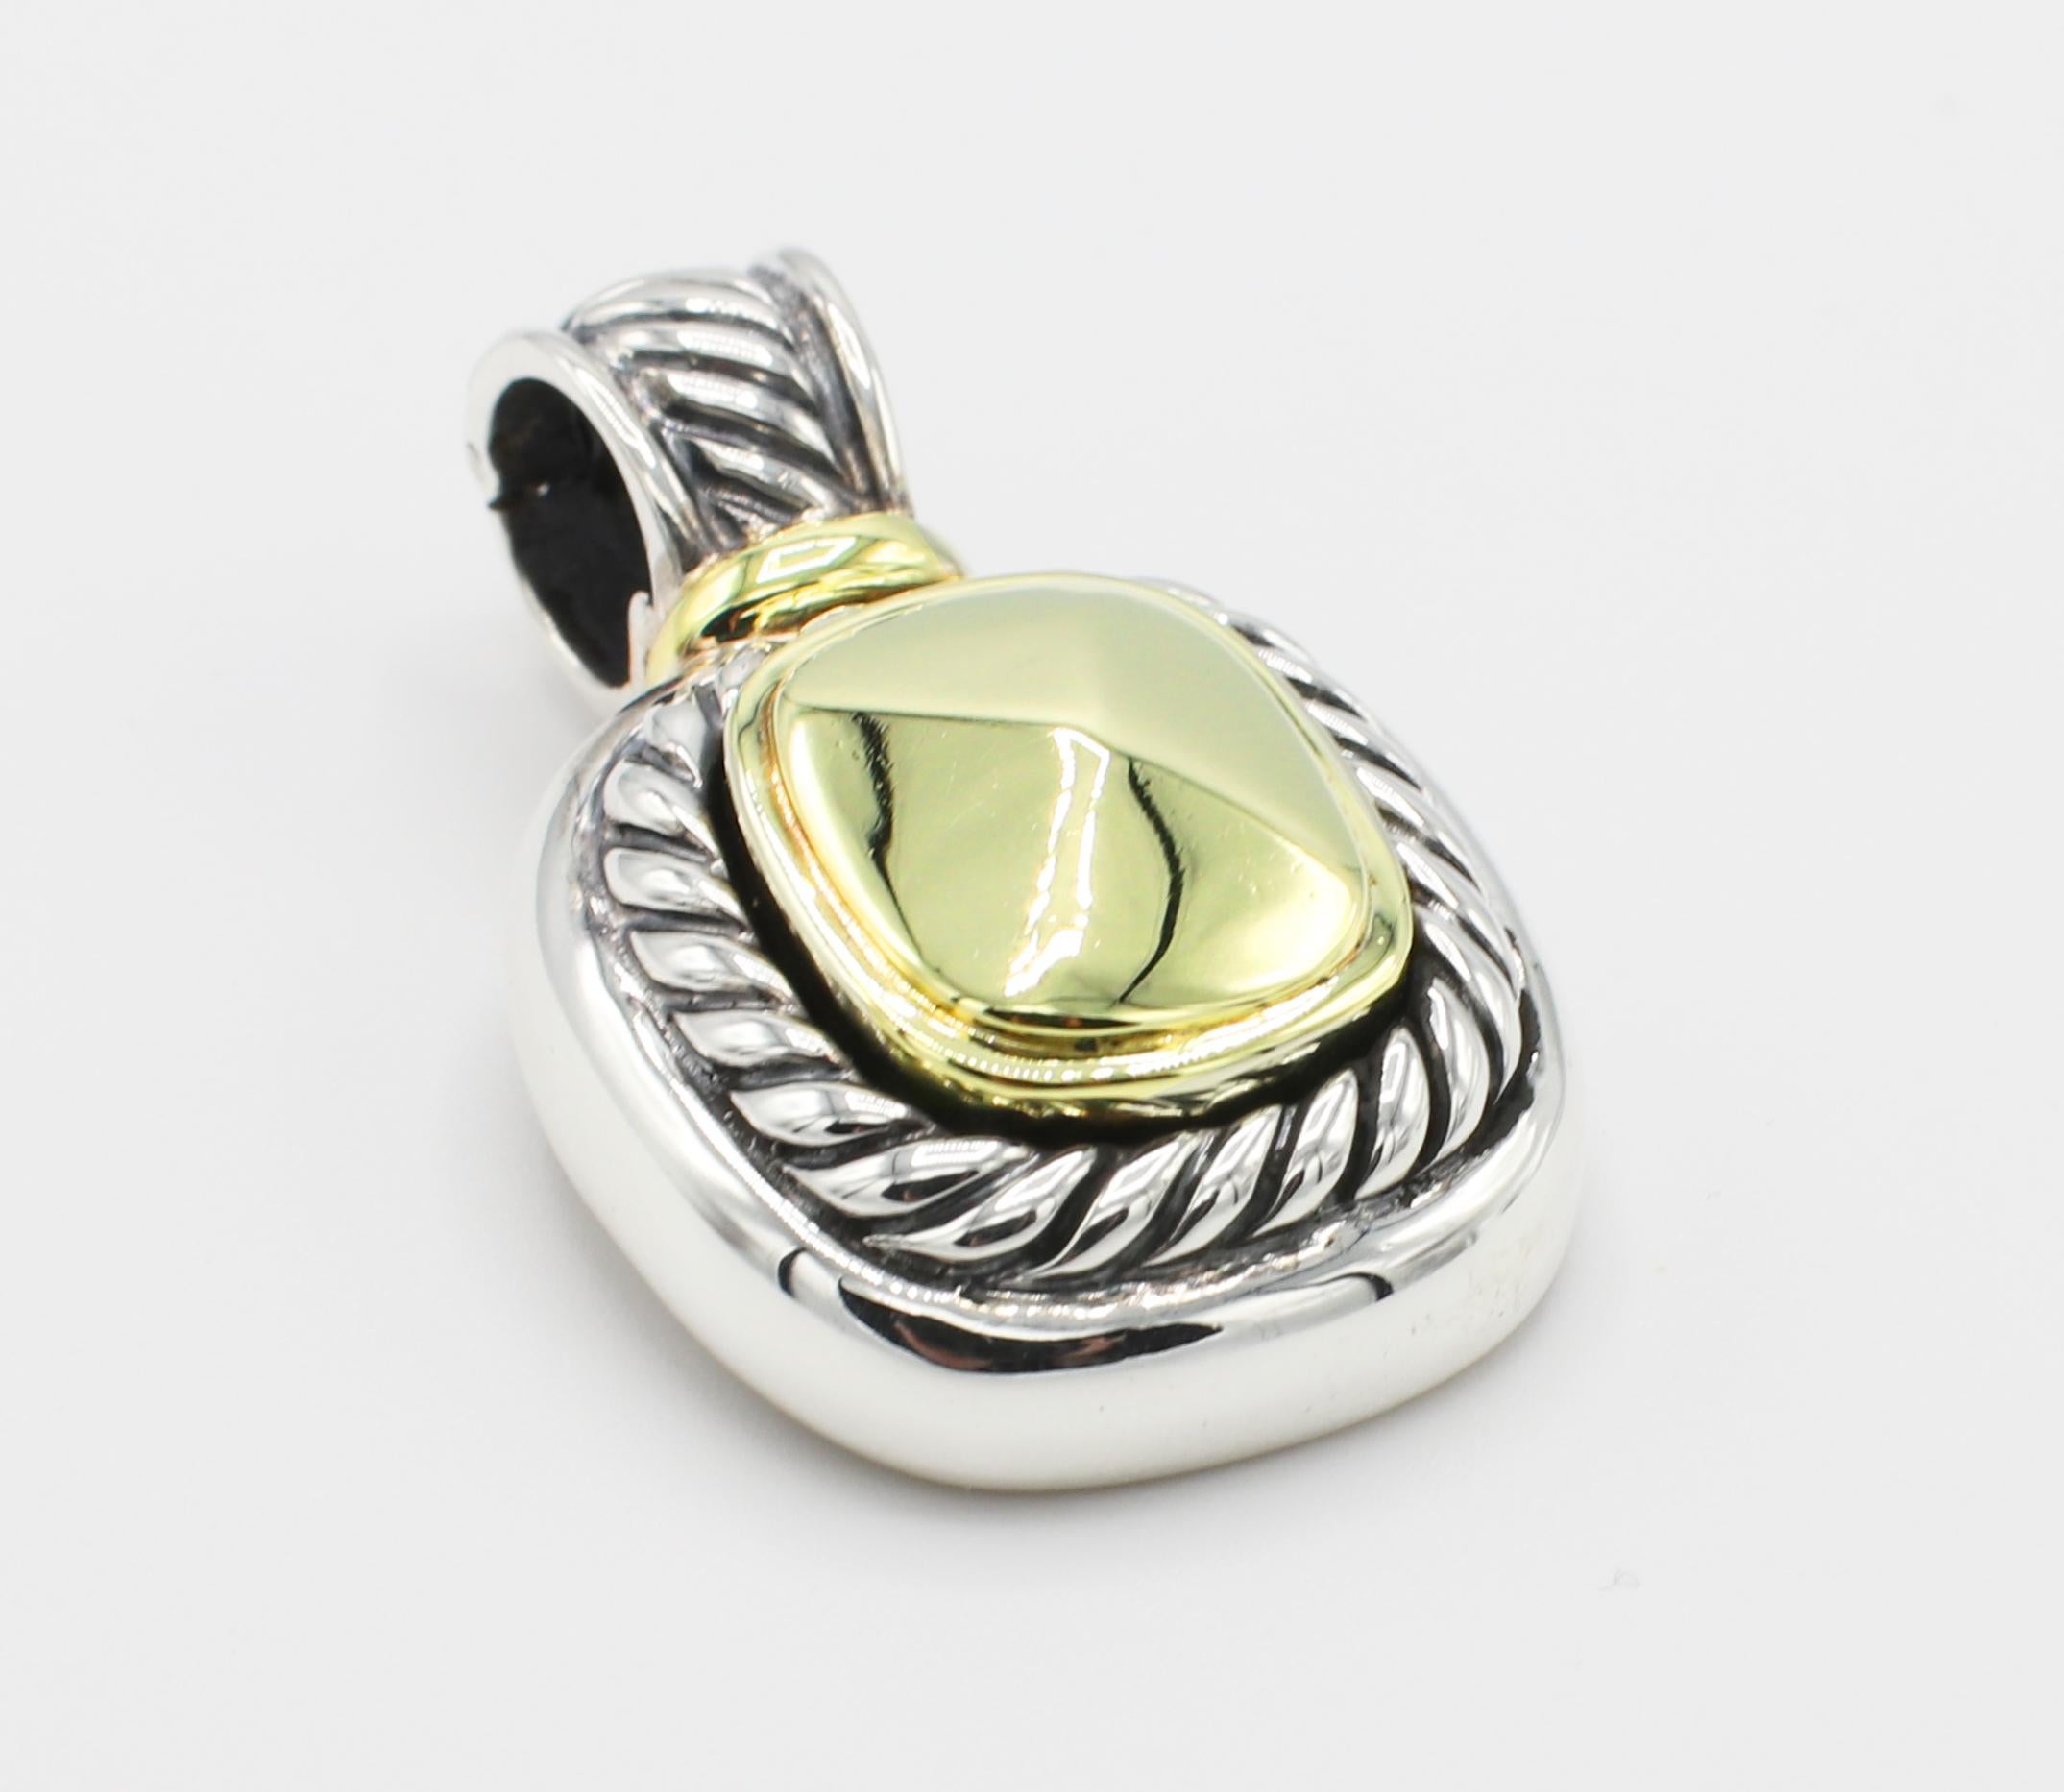 David Yurman Albion Dome Gold & Sterling Silver Pendant Enhancer 
Metal: Sterling silver 925 & 14k yellow gold 585
Weight: 12.47 grams
Length: 31MM (including bale)
Width: 19MM
Signed: D. YURMAN 925 585
*Pendant only, does not include chain 